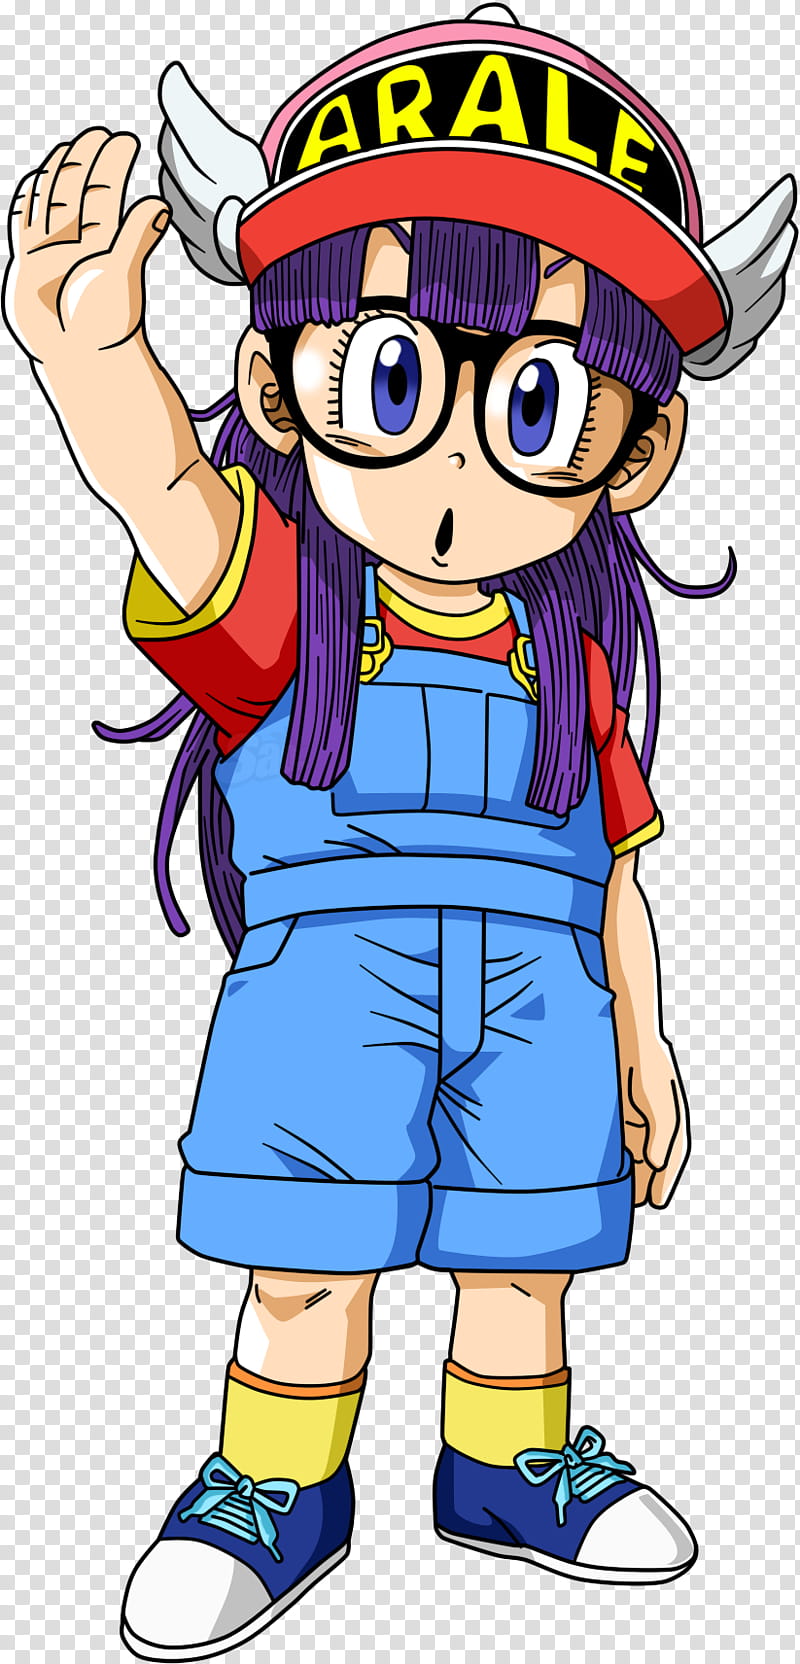 Arale DBS transparent background PNG clipart